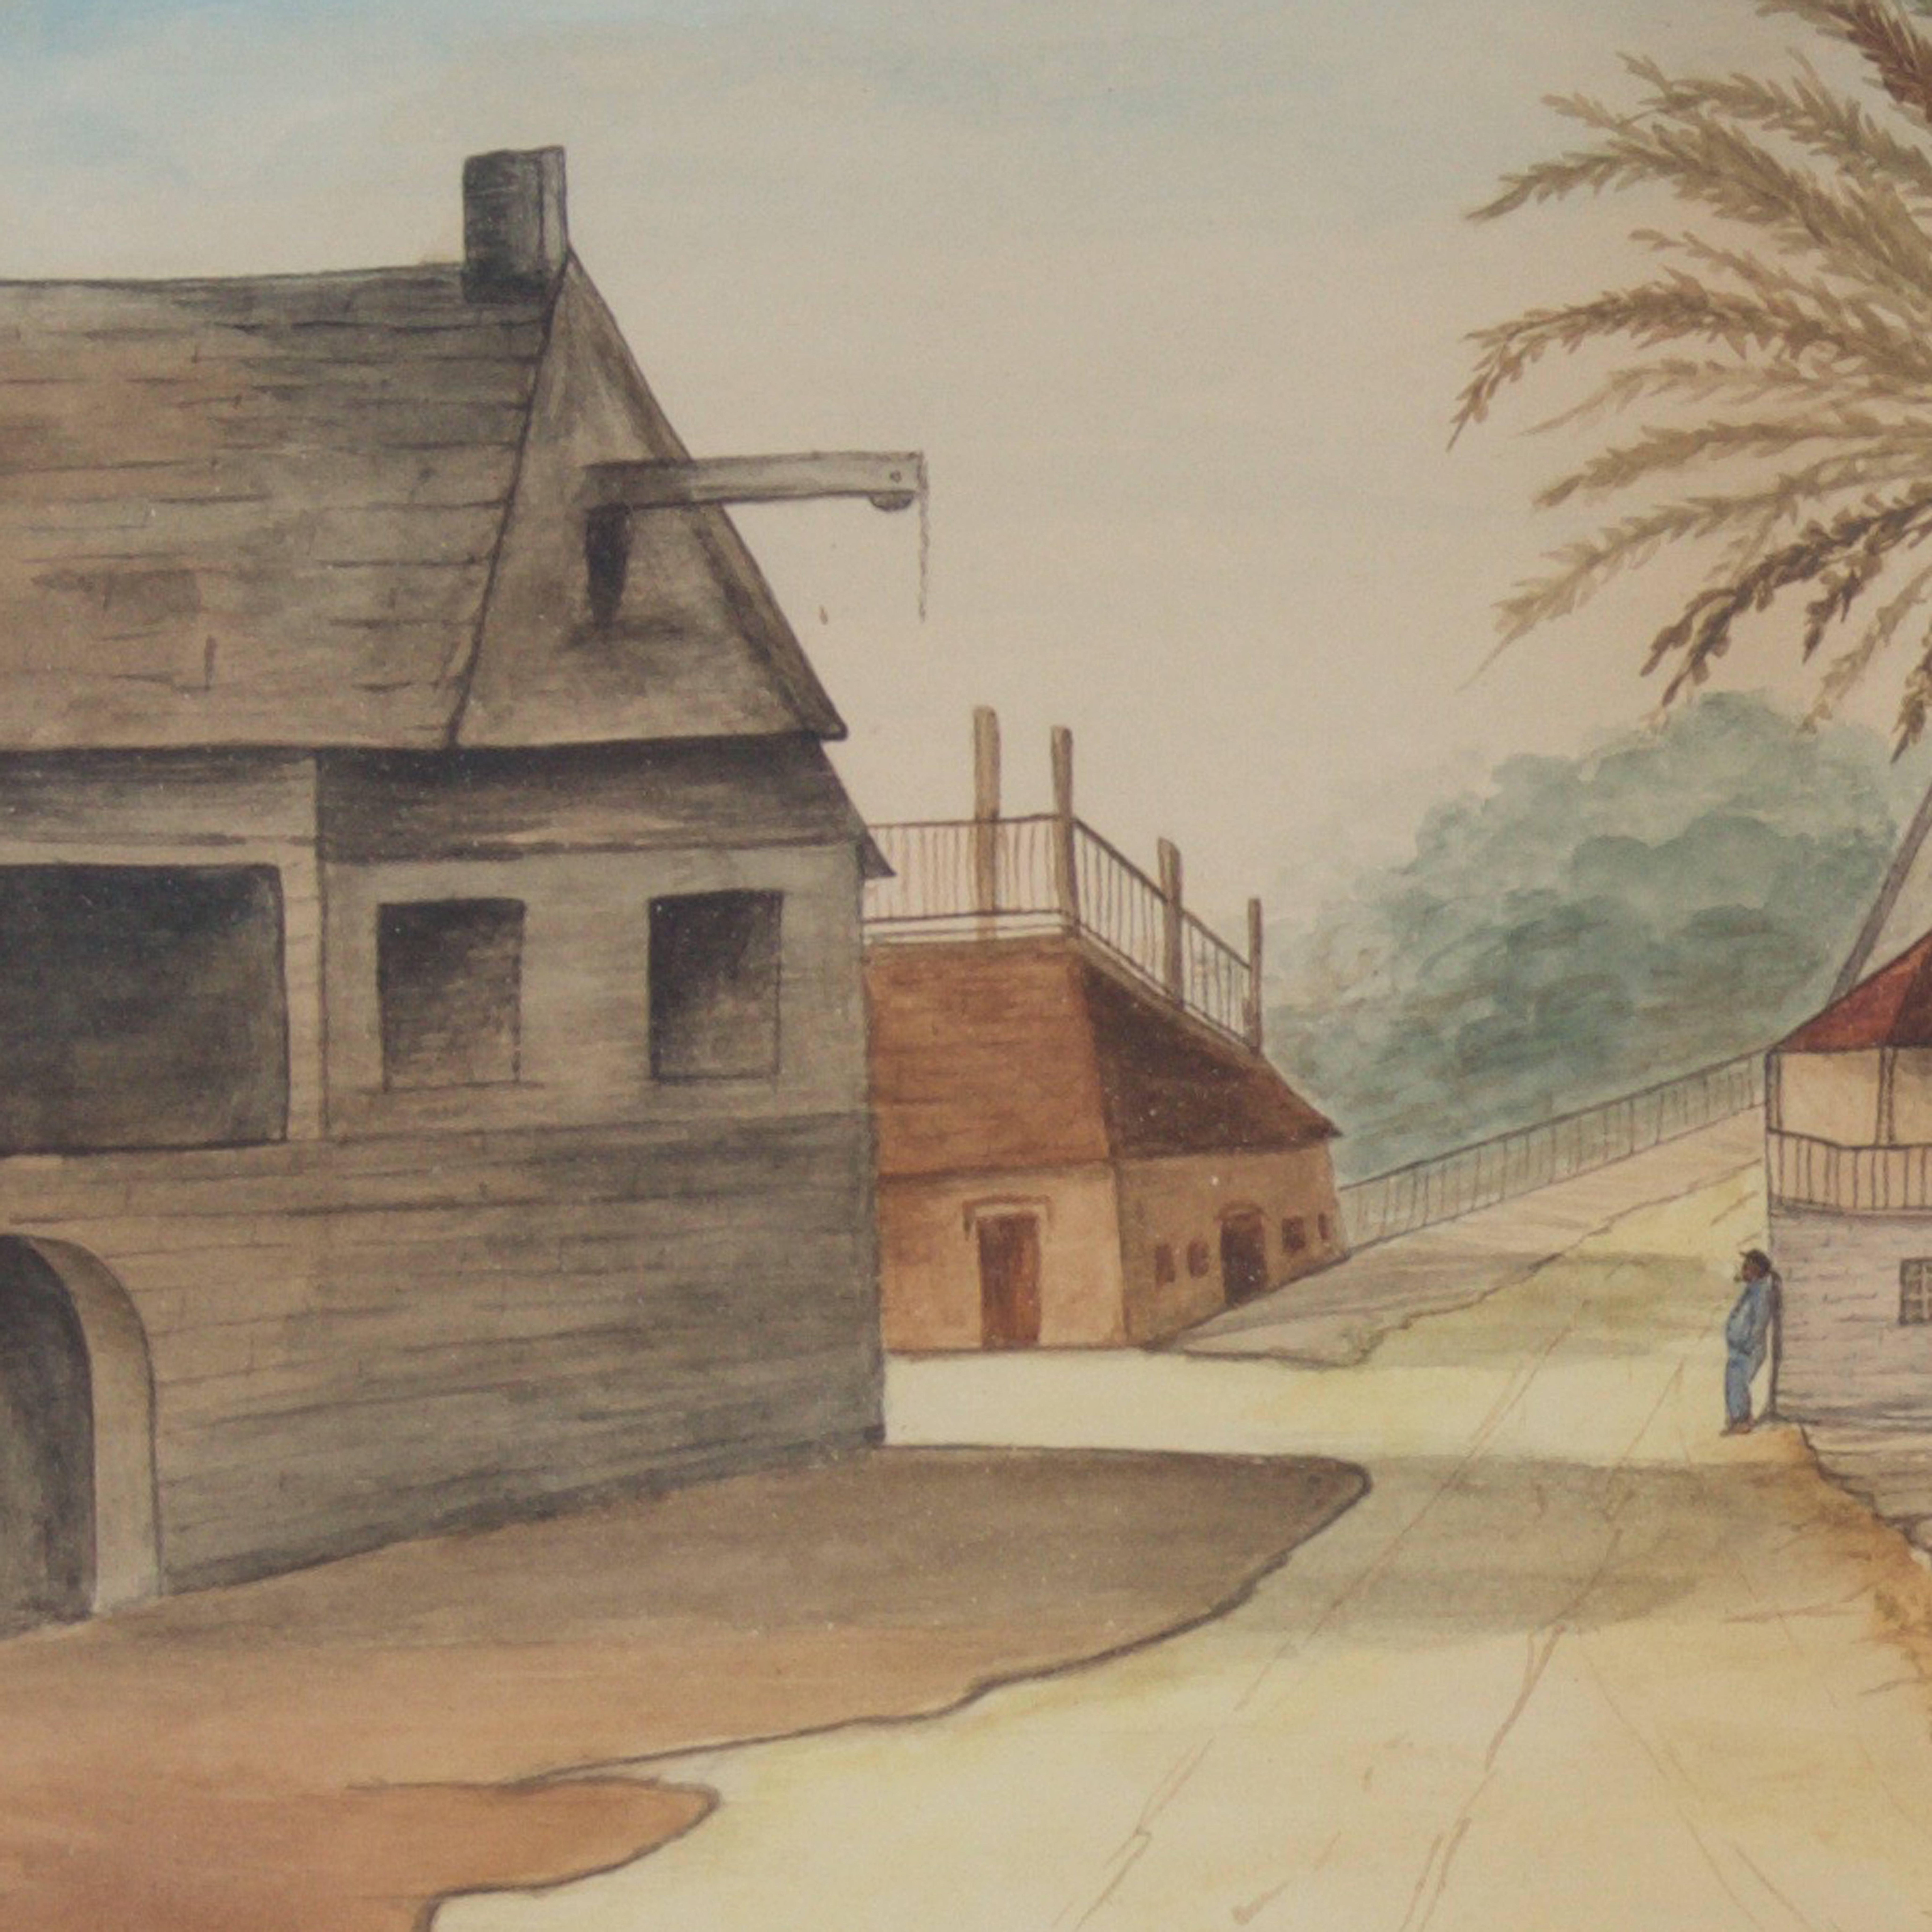  Tropical Watercolor Depicting a Rural Street Scene with a Date Palm  1